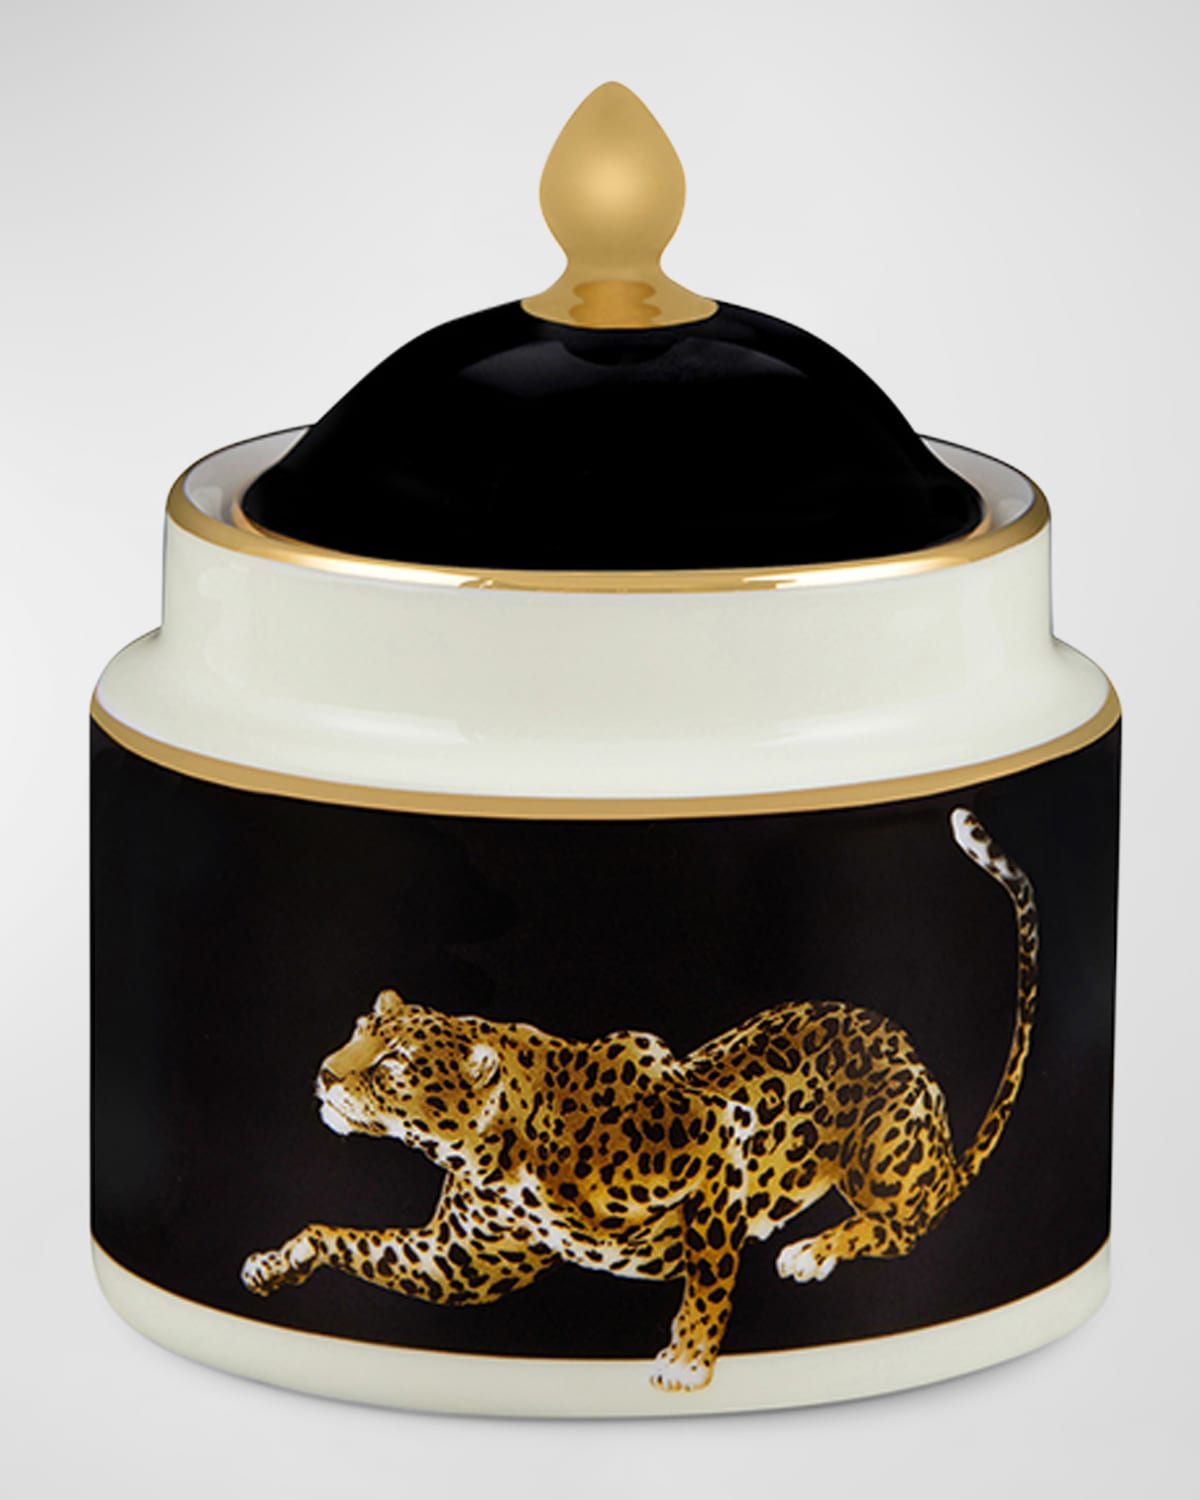 Leopard Sugar Bowl with Cover